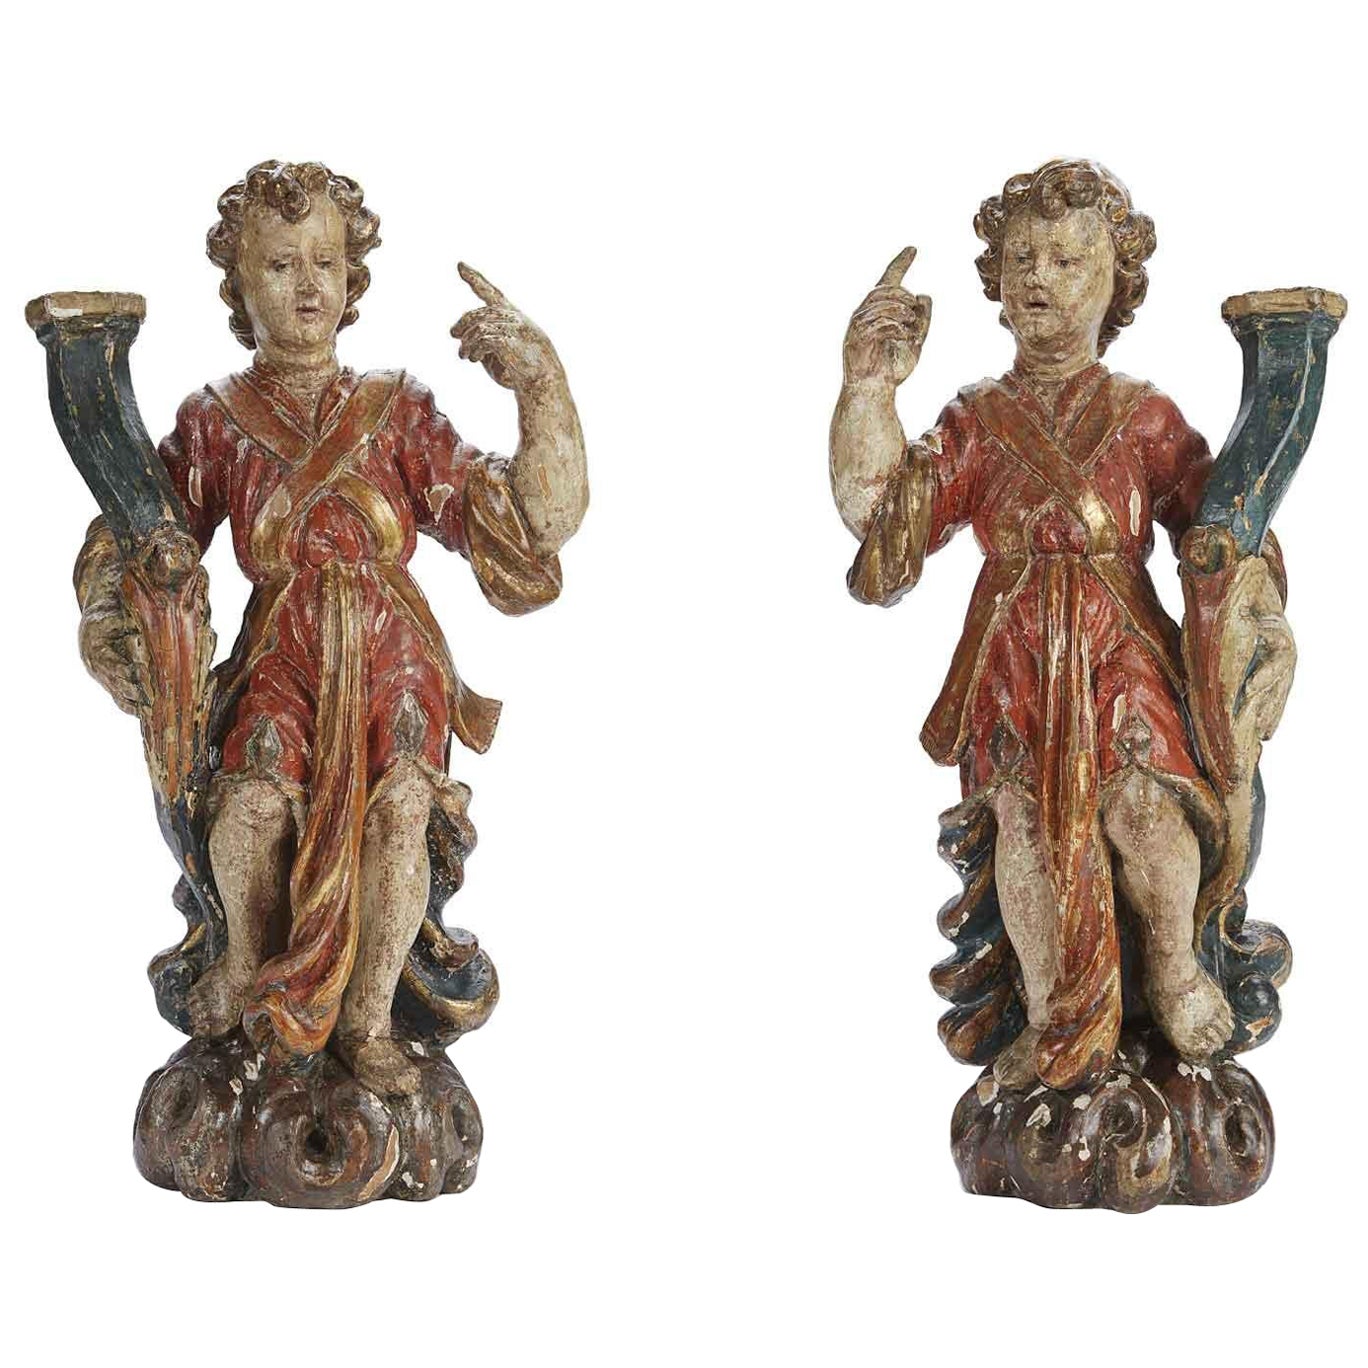 Pair of Carved Lacquered and Gilded Candle Holder Angels Italian Sculptures 1650s For Sale